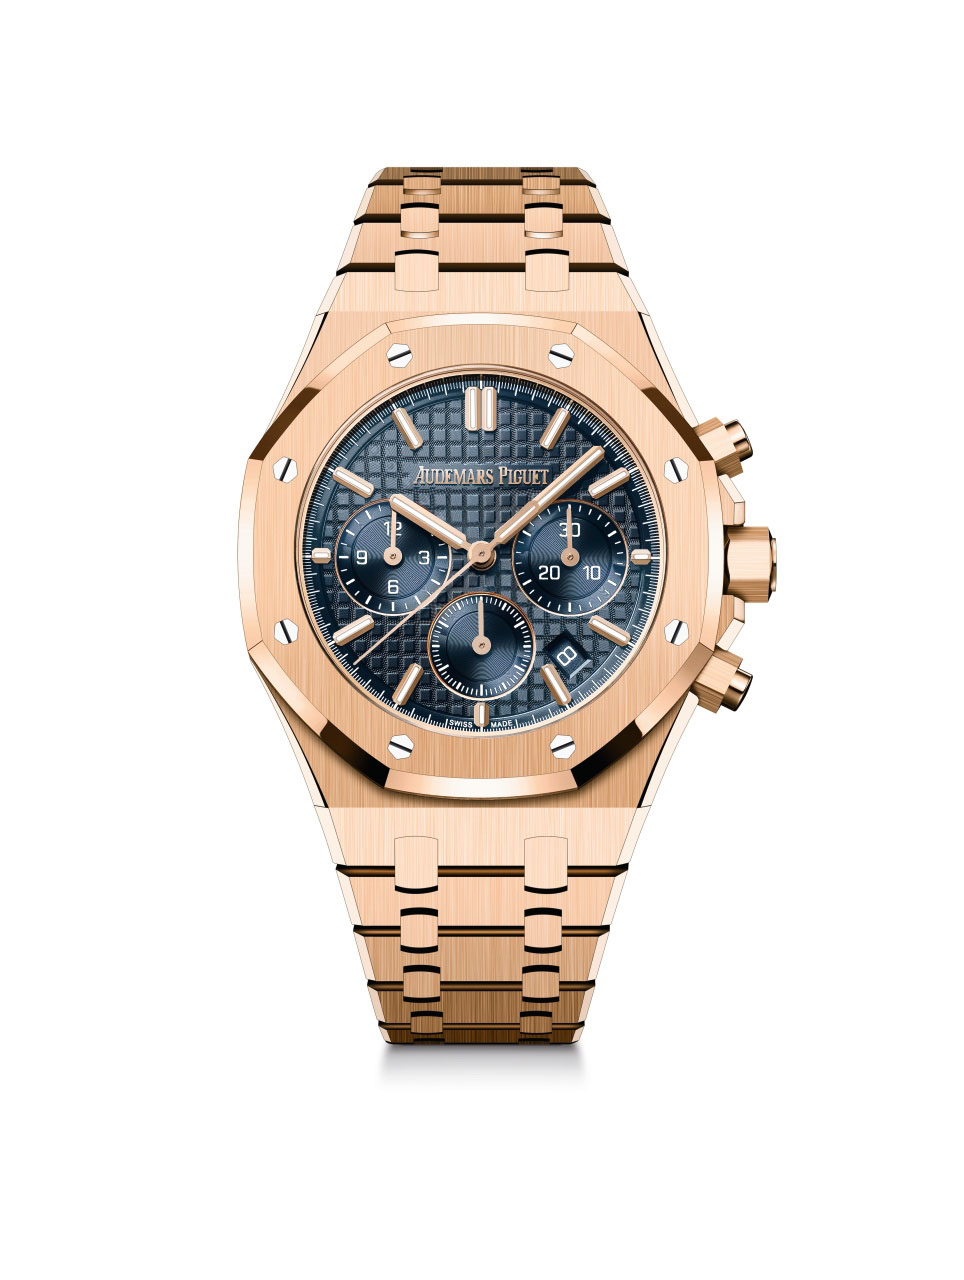 Royal Oak Selfwinding Chronograph / 38mm; 18-carat pink gold case with “Bleu Nuit, Nuage 50” dial (26715OR.OO.1356OR.01)